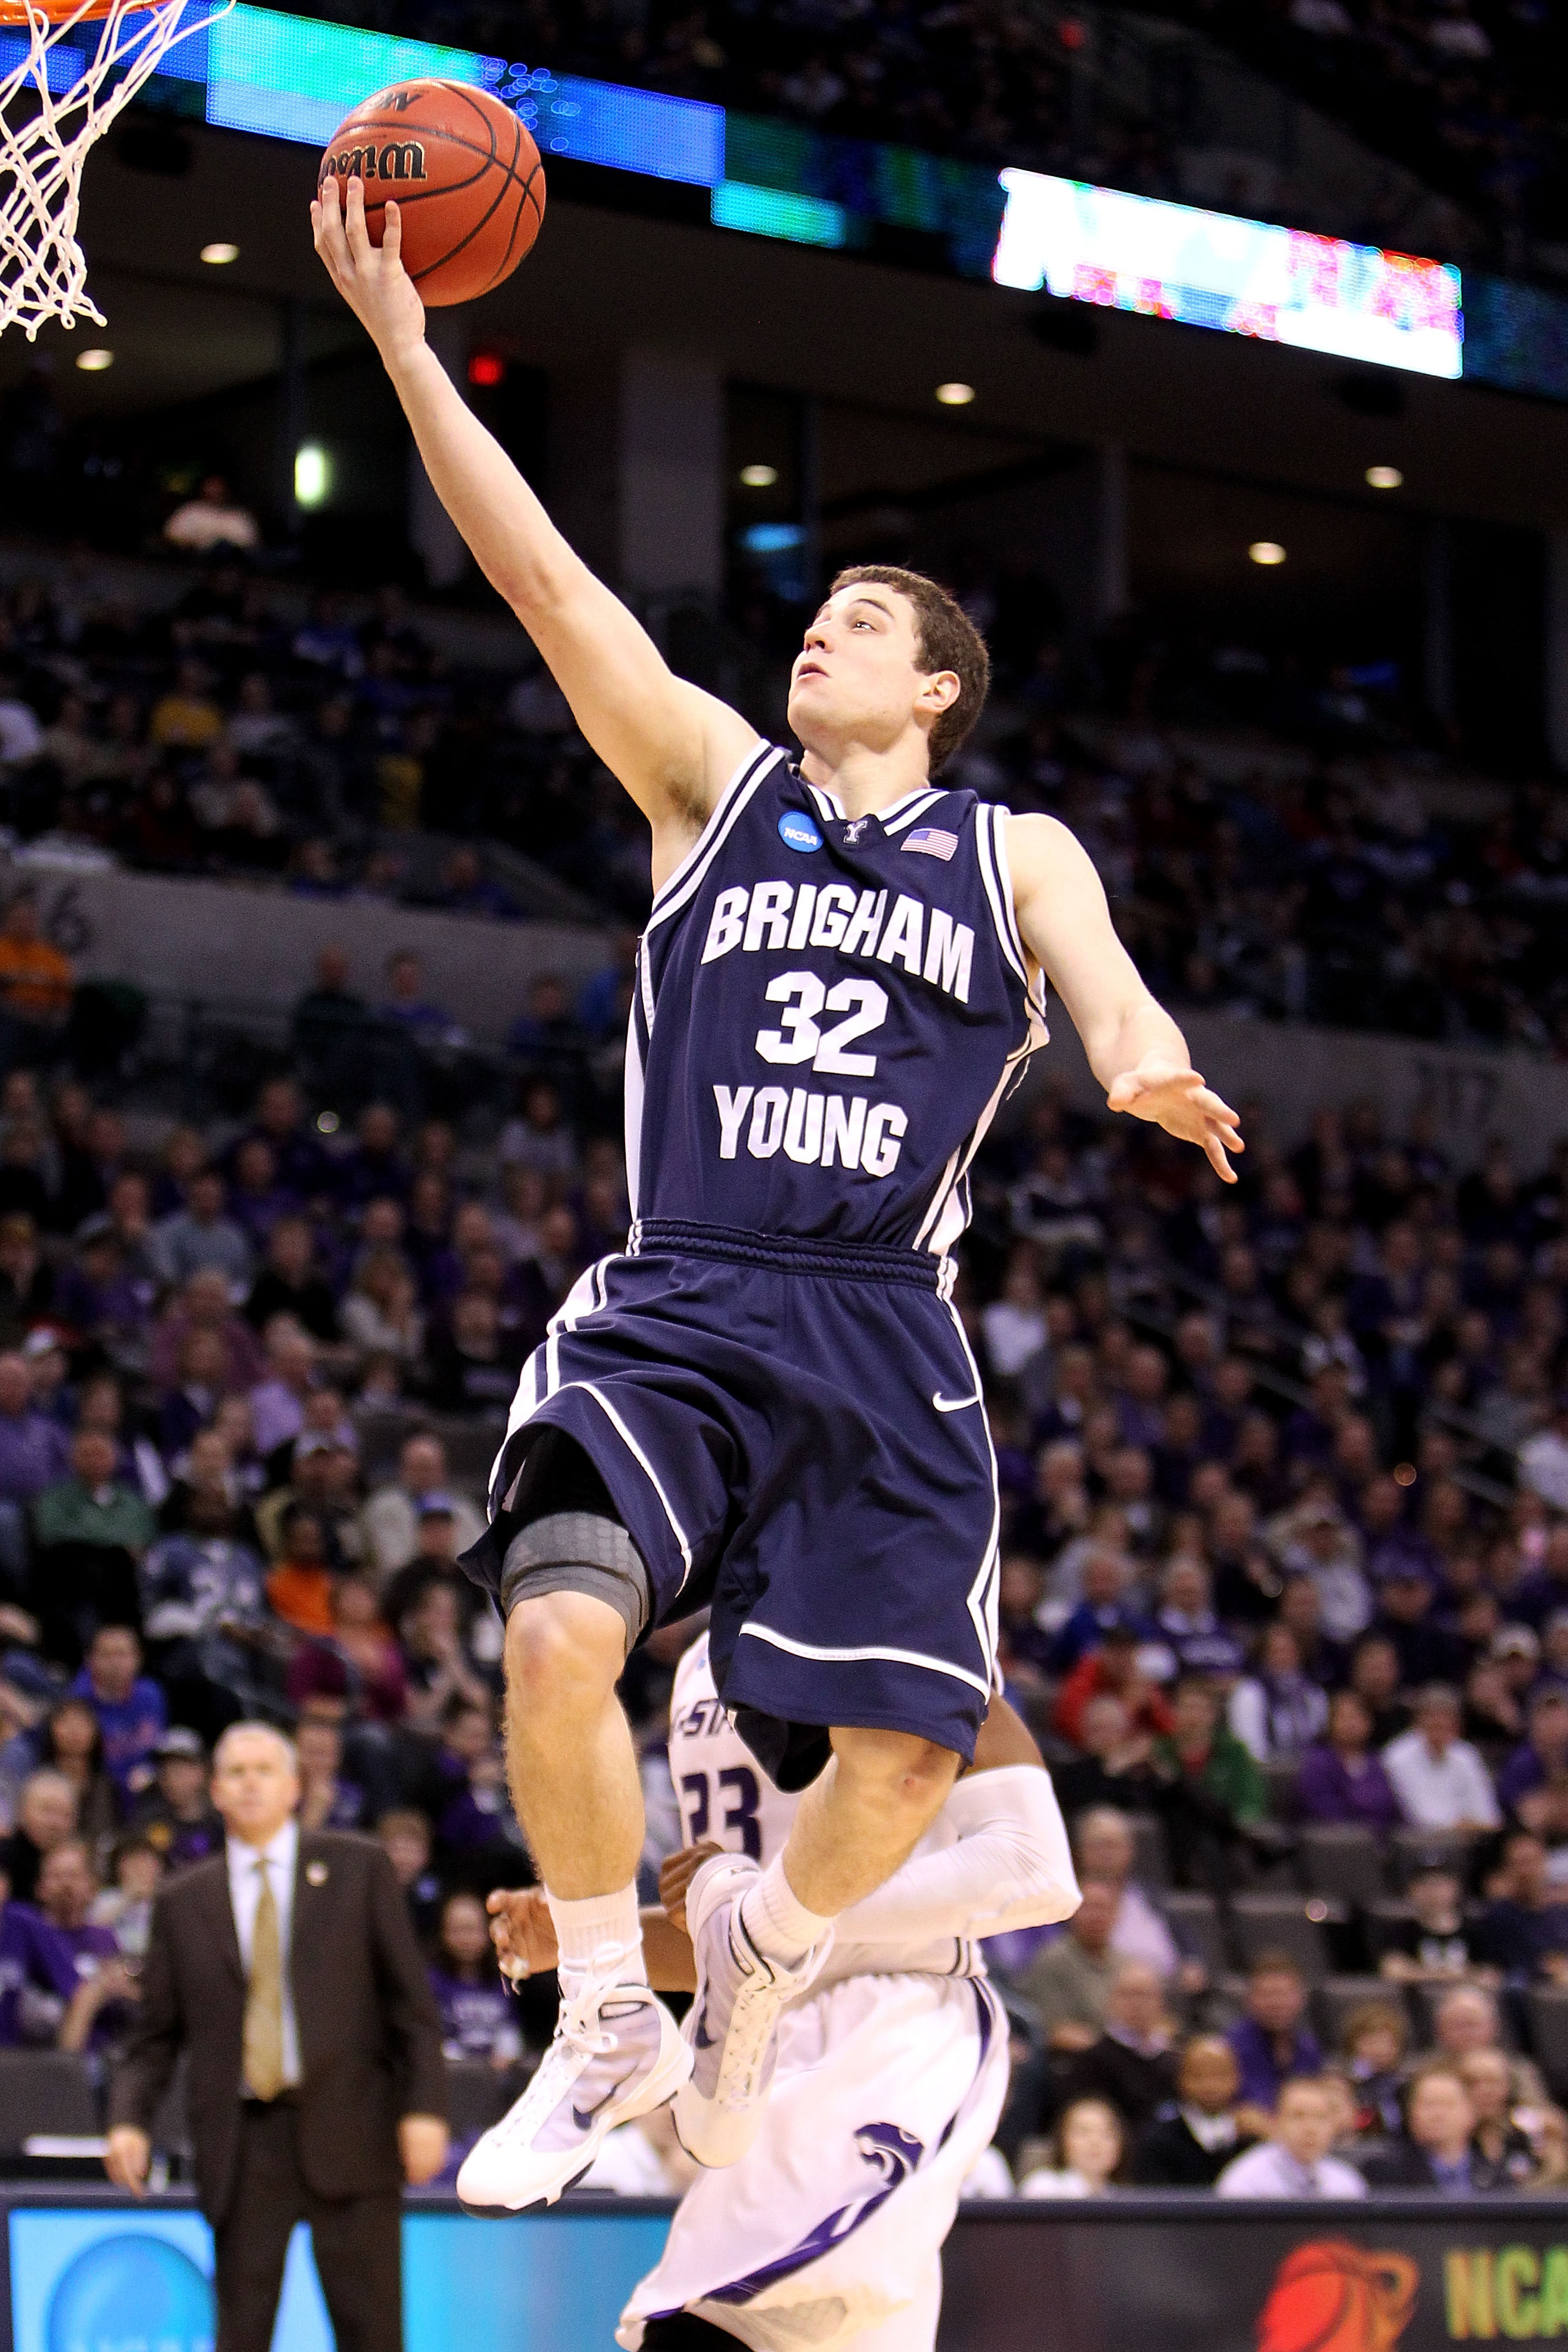 OKLAHOMA CITY - MARCH 20:  Jimmer Fredette #32 of the Brigham Young Cougars drives for a shot attempt against the Kansas State Wildcats during the second round of the 2010 NCAA men's basketball tournament at Ford Center on March 20, 2010 in Oklahoma City,